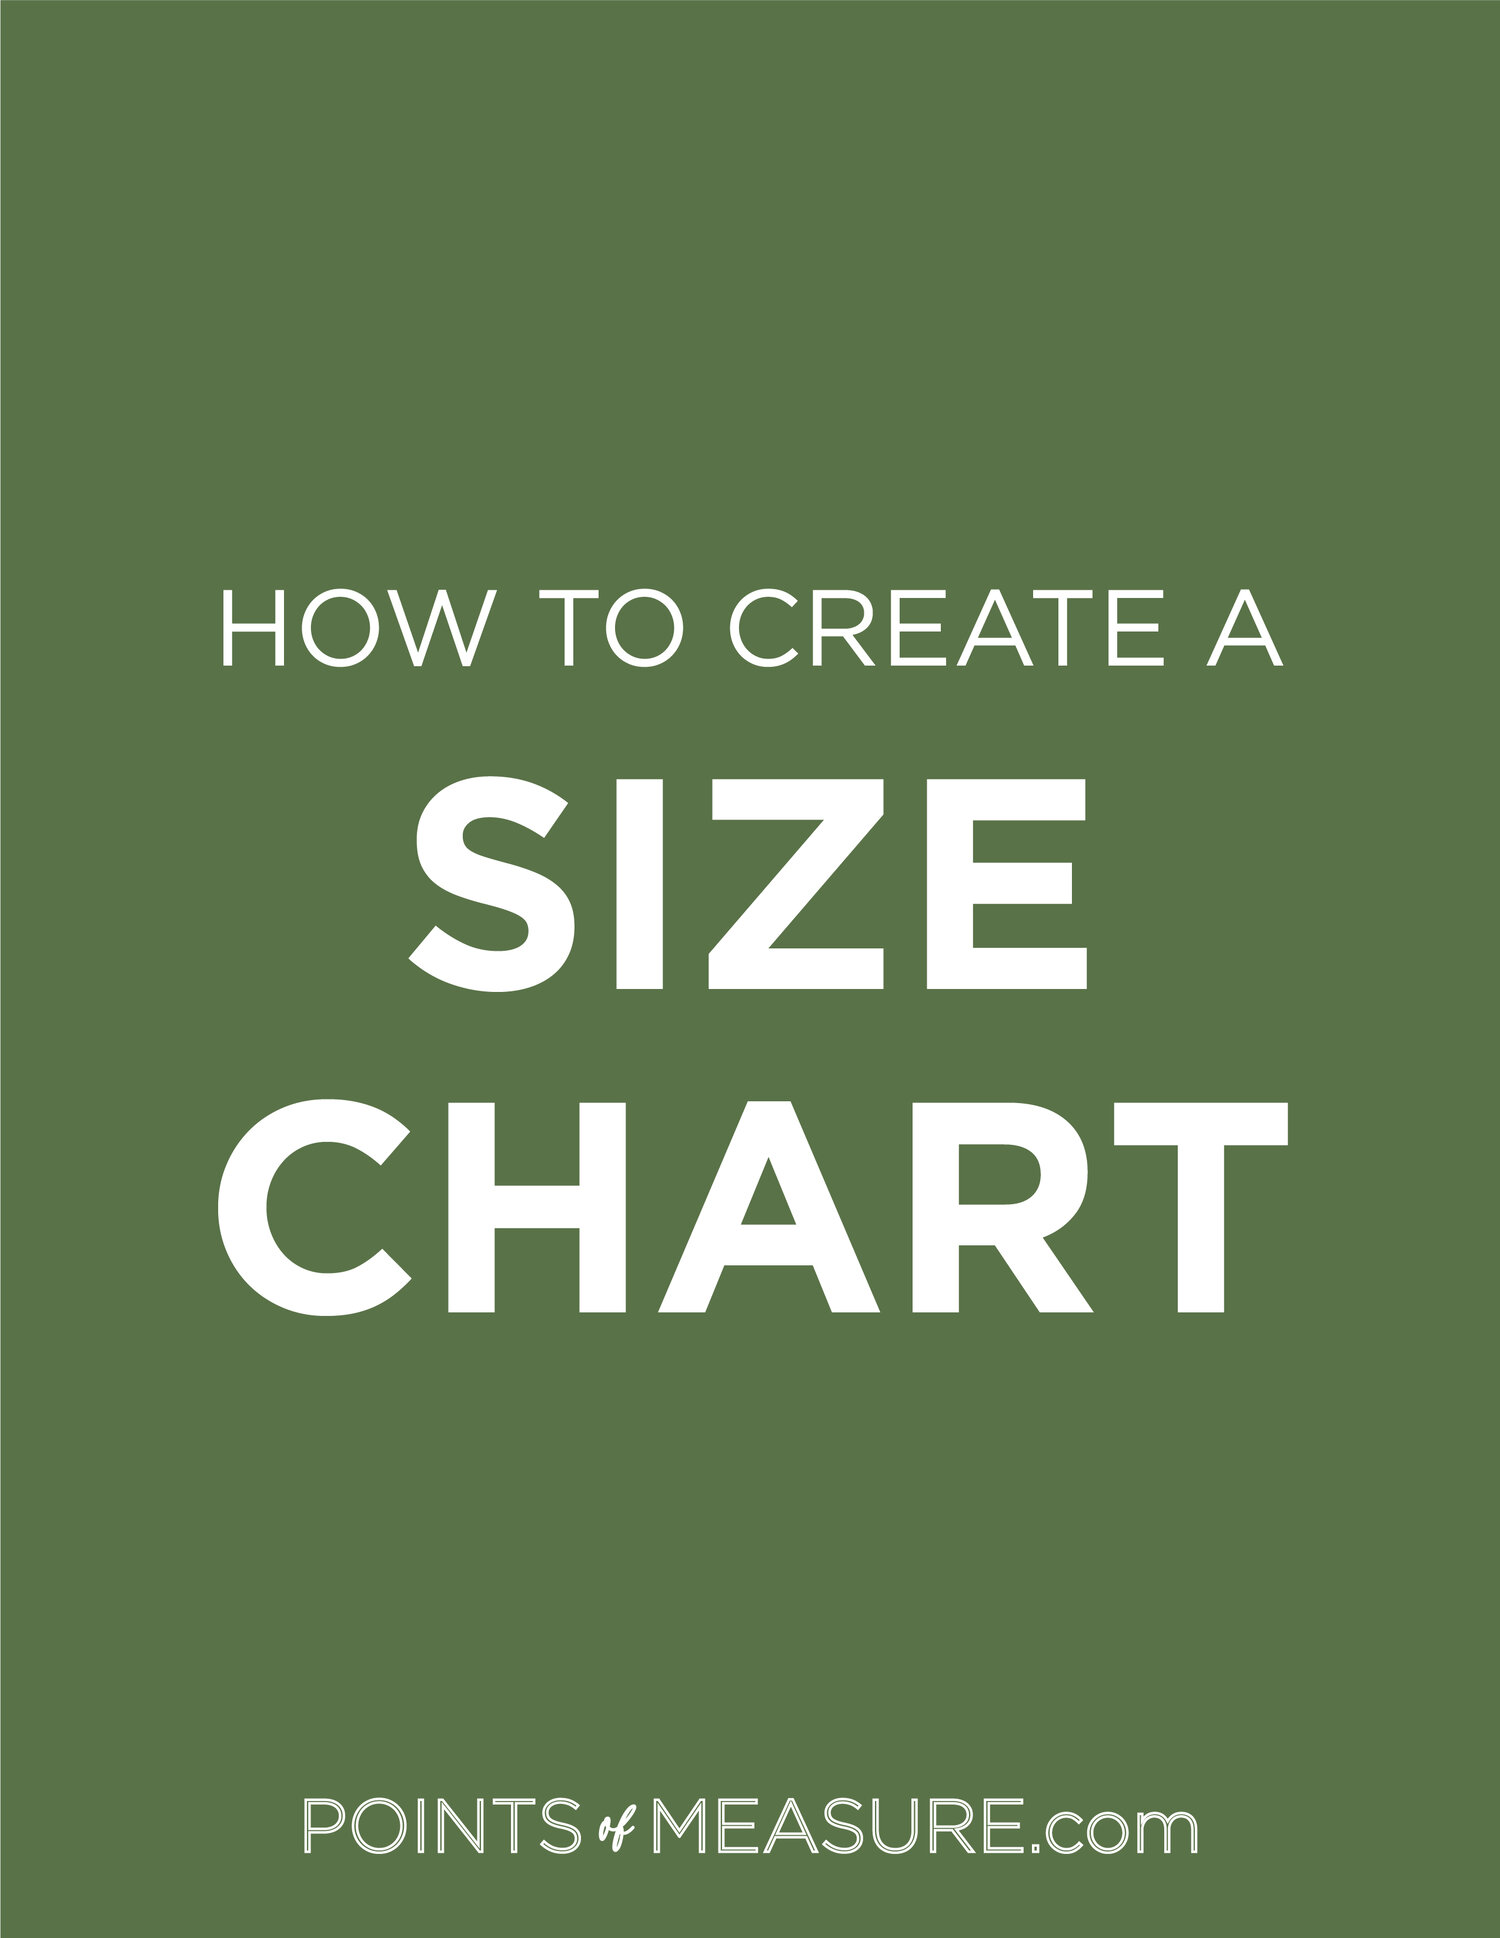 How to Create a Size Chart for Your Fashion Brand — Points of Measure